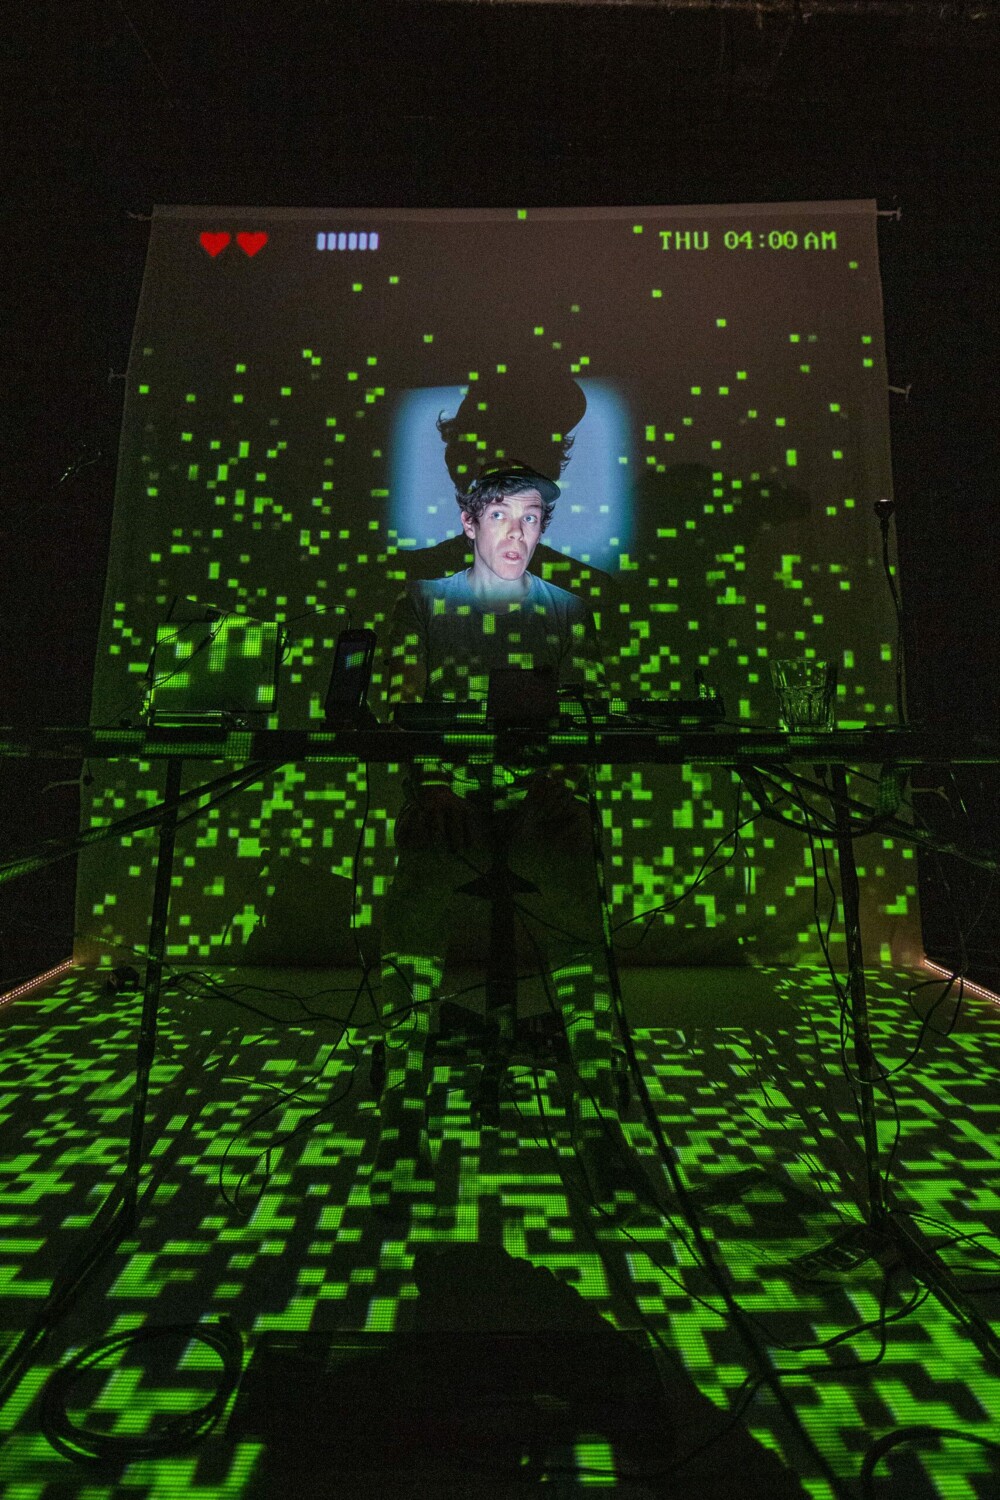 Tröll (photo credit: Tabitha Arthur) Image description: In a pitch black room, a young white man wearing a cap is visible from the shoulders up, illuminated by a square blue light shining up onto his face, with his enlarged silhouette visible behind him. Glitchy green lights are superimposed across the entire frame, and in the top left corner are two pixellated heart icons and several blue vertical bars, as if they were framing a vintage video game.